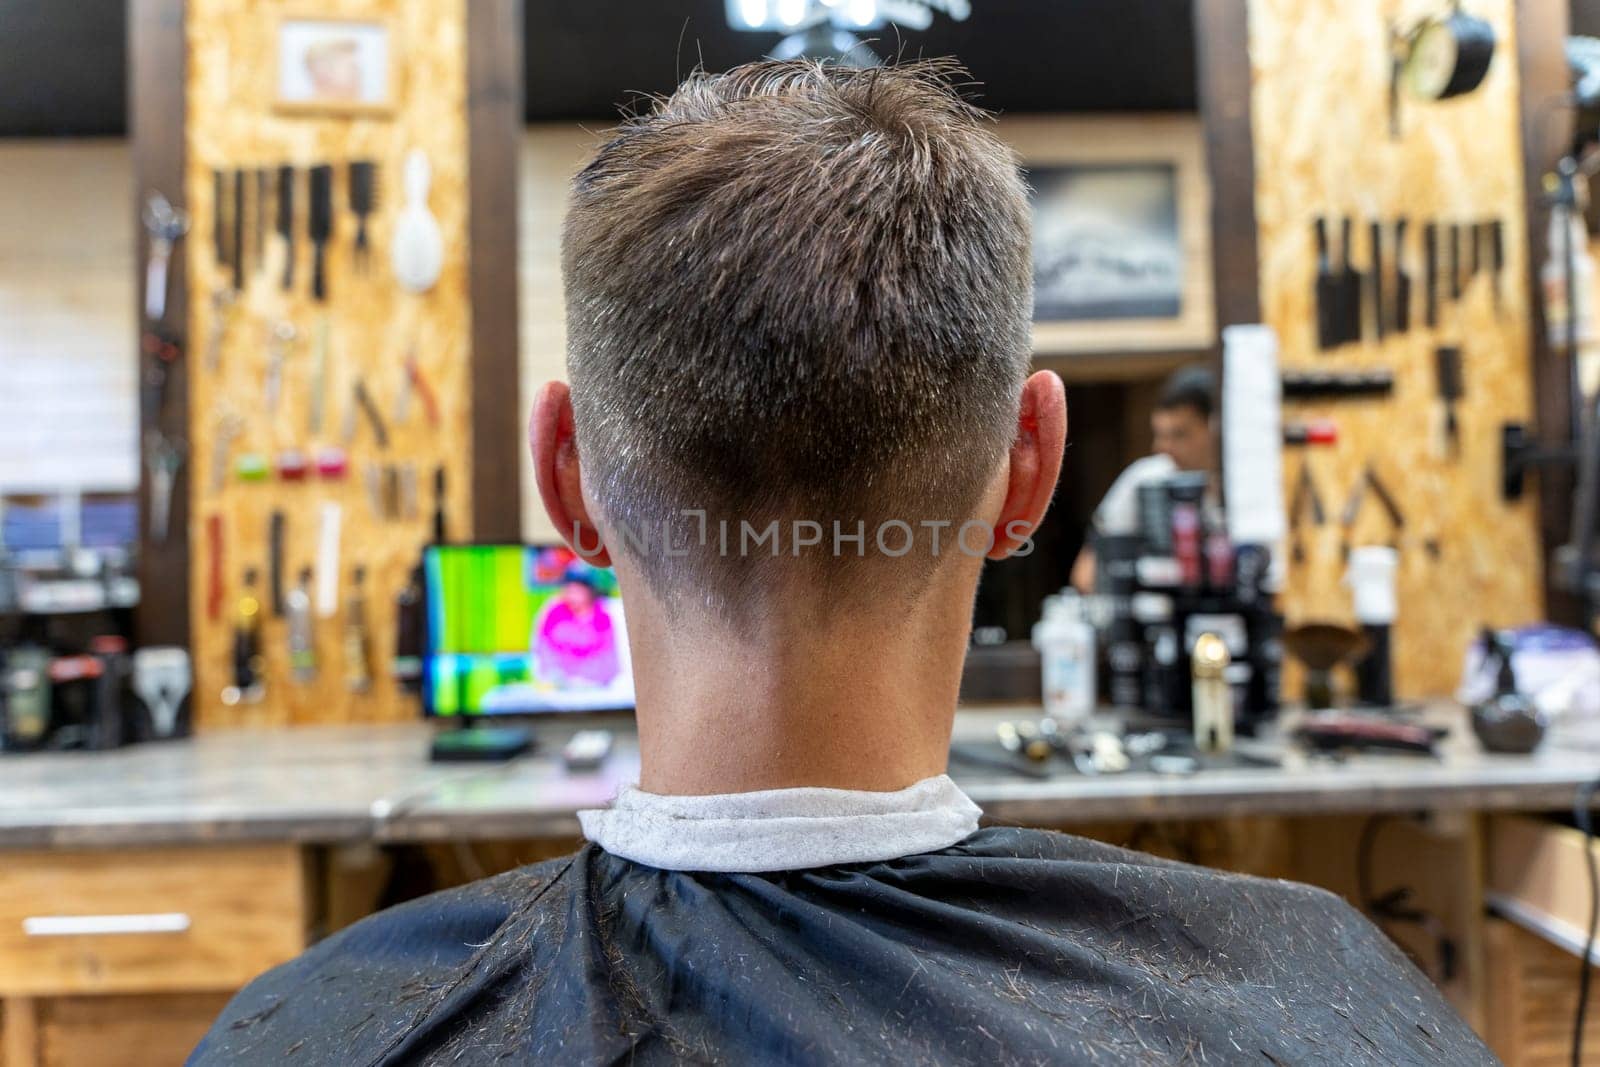 professional hairdresser cuts a man's hair. visit to the barber shop by audiznam2609